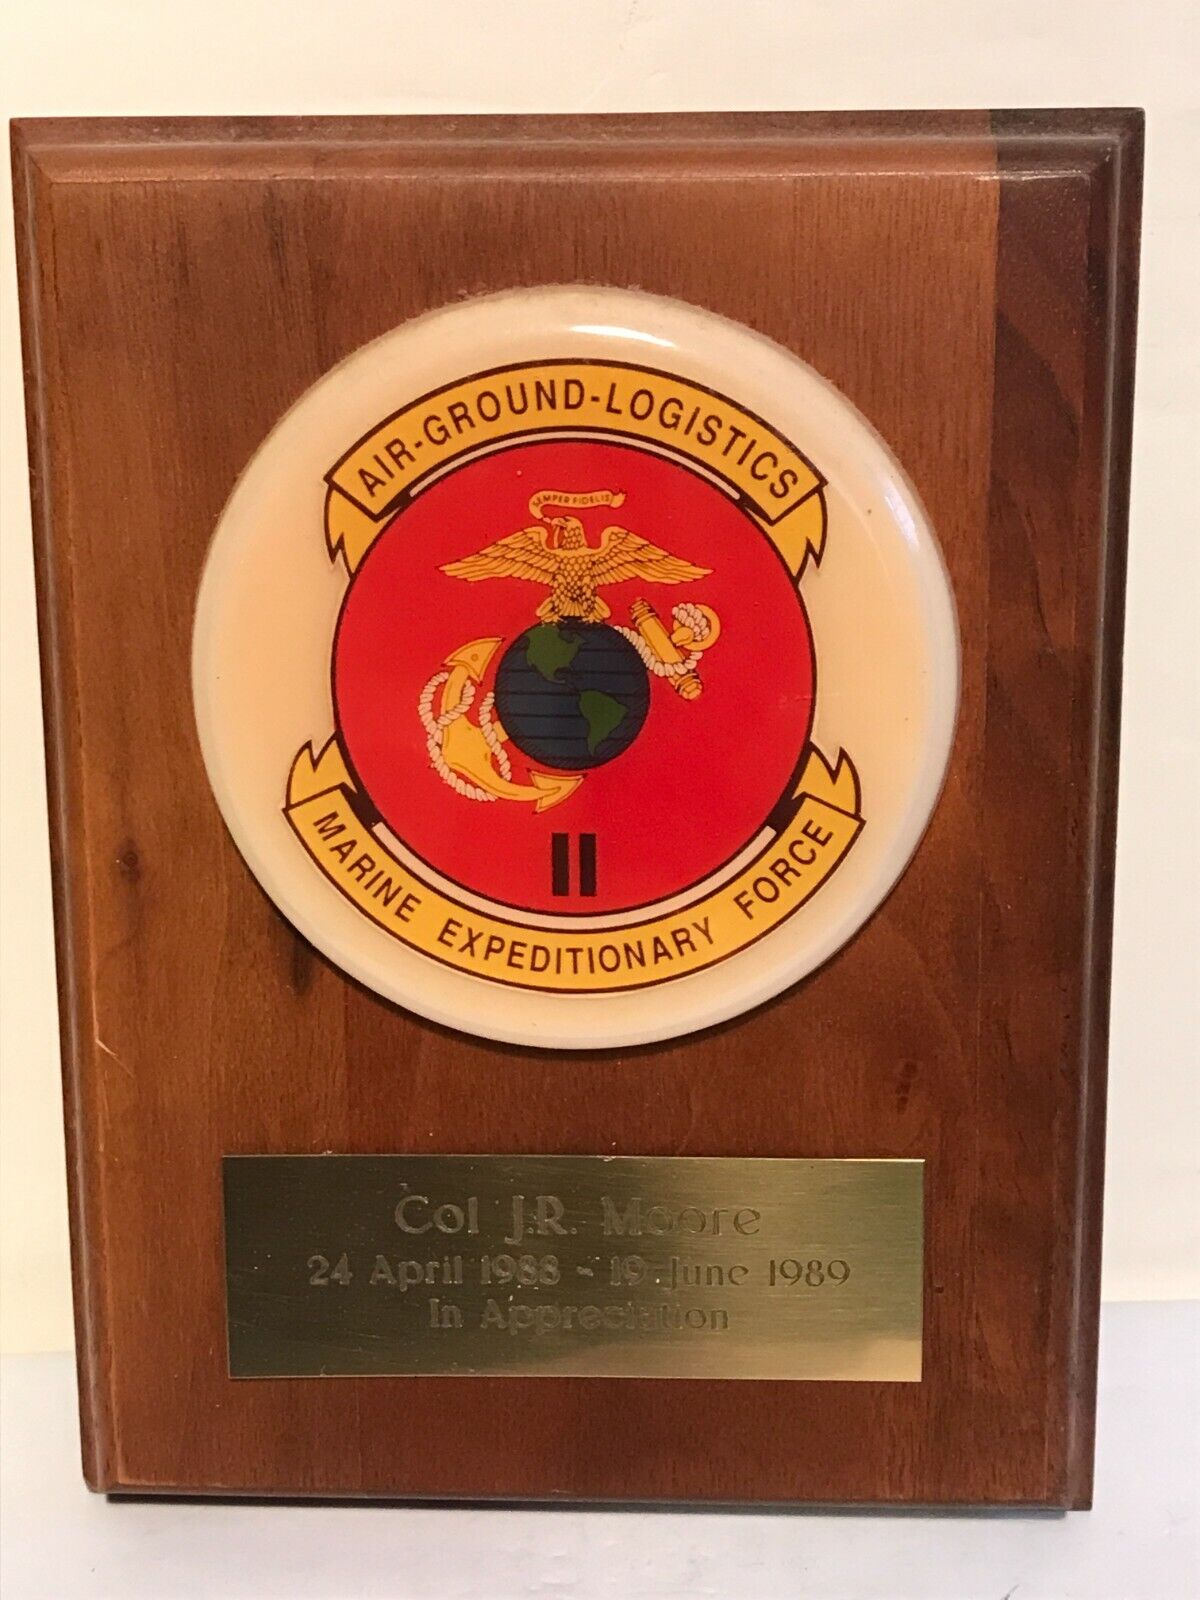 air ground logistics II marine expeditionary force wood wall plaque 1988 - 1989